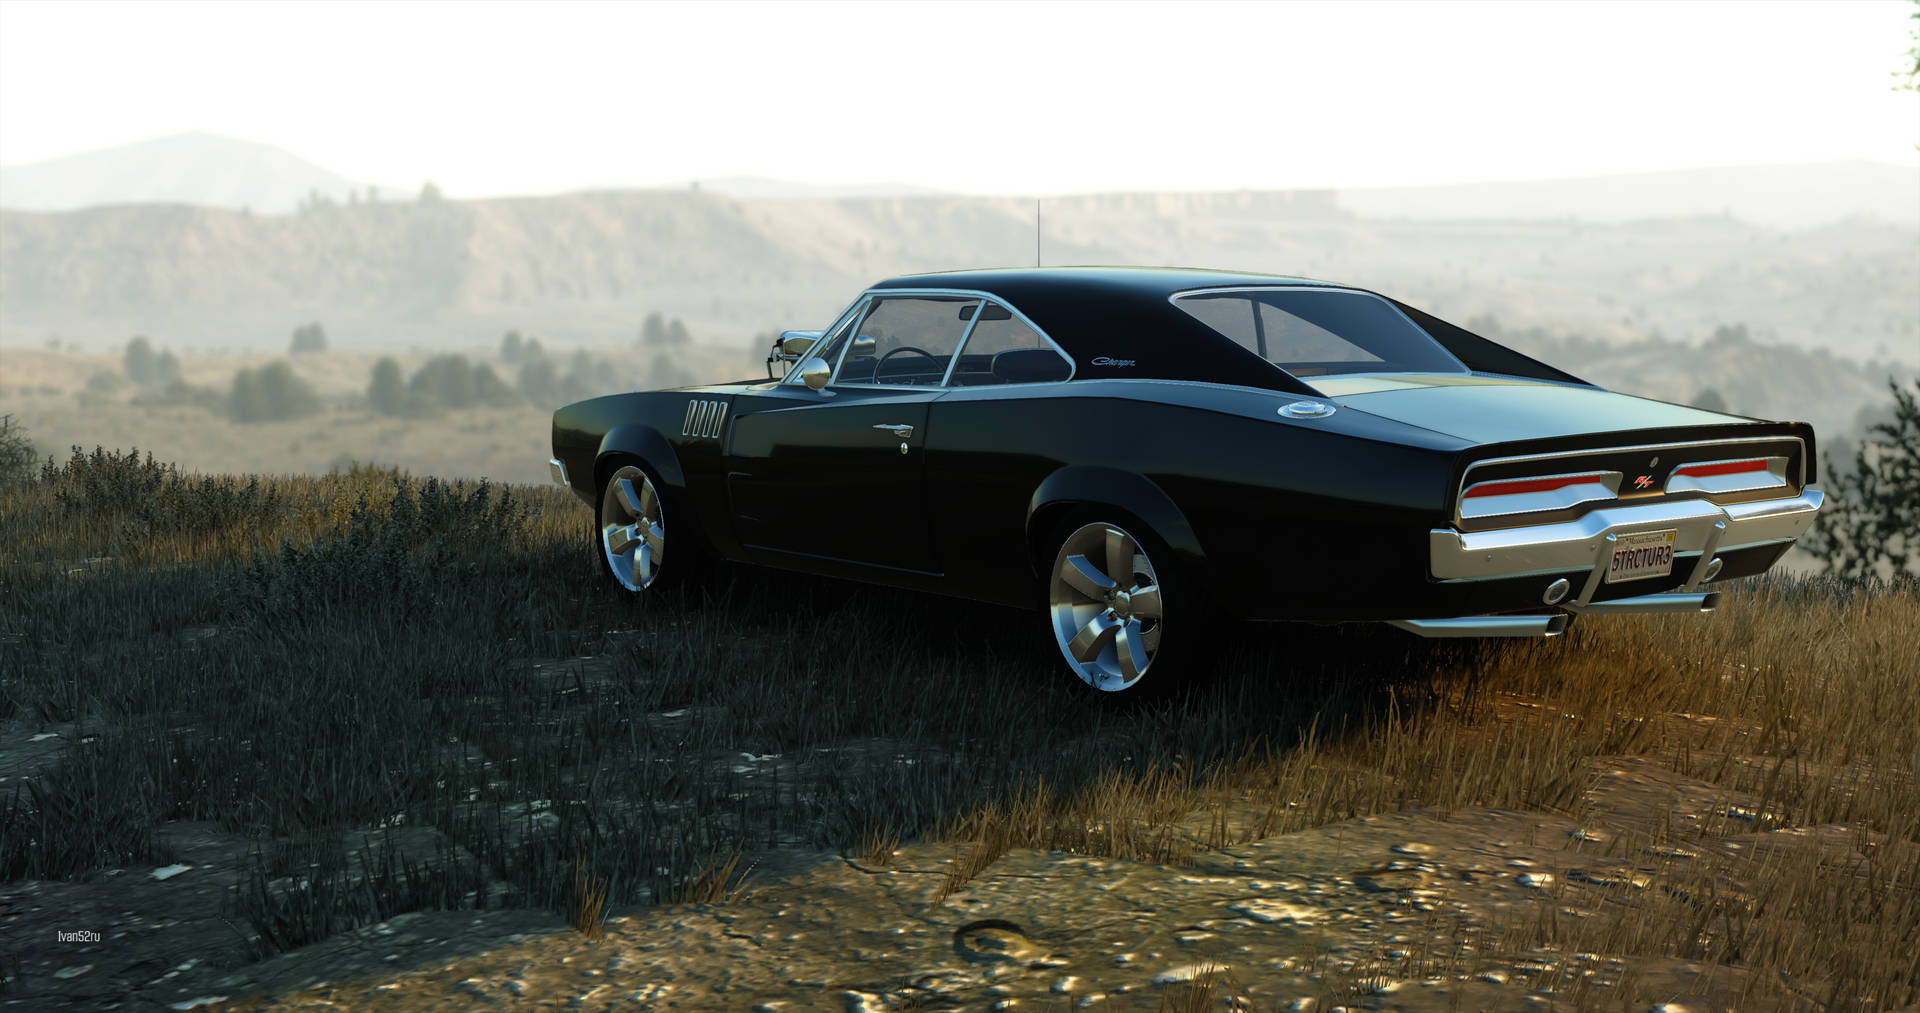 Caption: High-resolution Gta Gaming Action Featuring The Dodge Charger Background